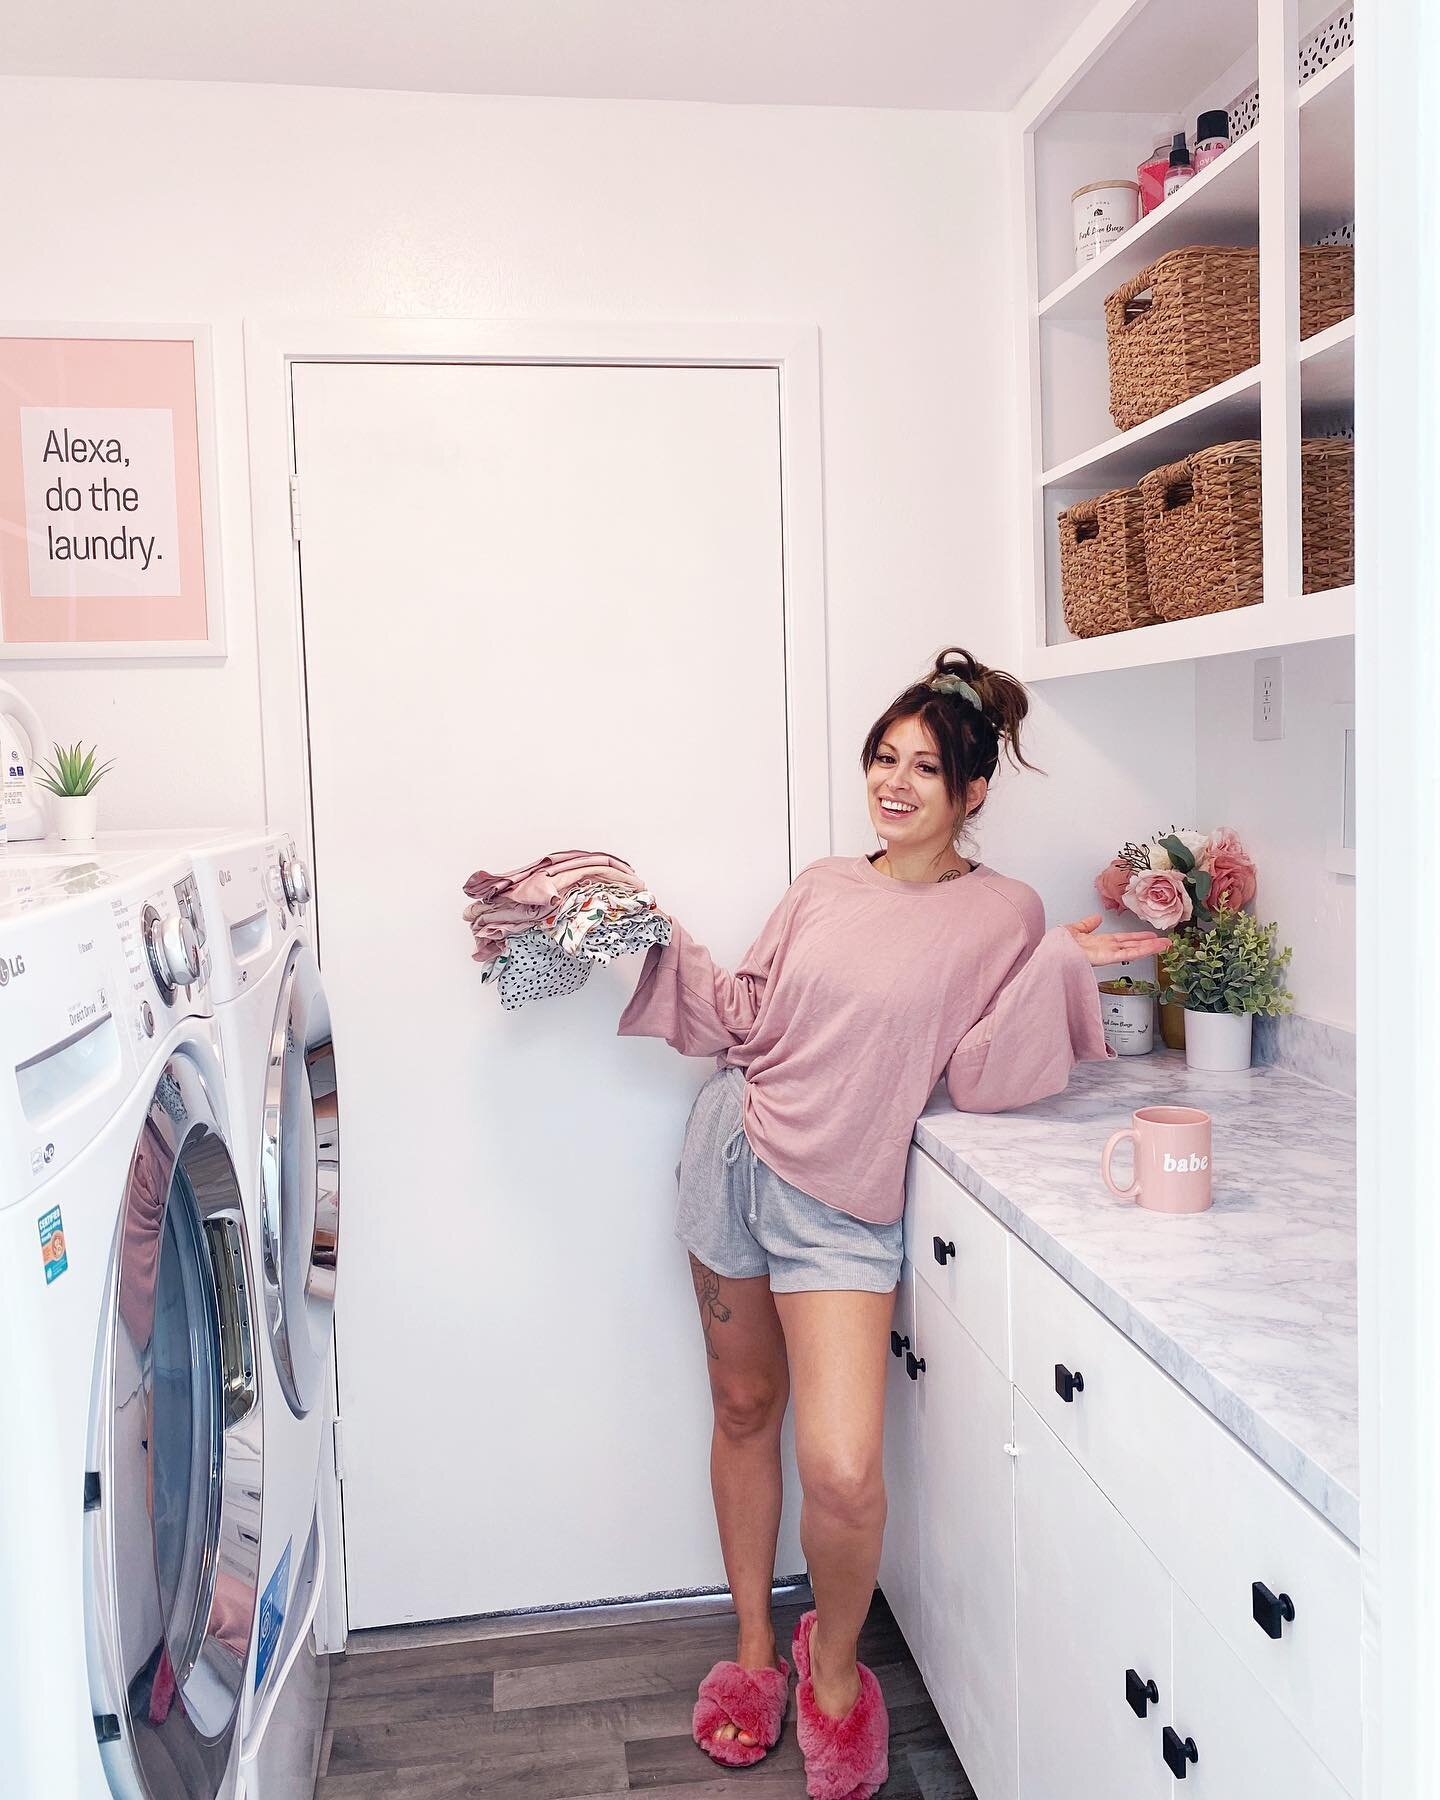 Yay the laundry room is done and let me tell you, IT 👏 IS 👏 EVERYTHING👏.
You can head to the blog (link in bio) to check out the full reveal and read about what we did to revamp the space. I&rsquo;m bummed we didn&rsquo;t do this sooner so hopeful